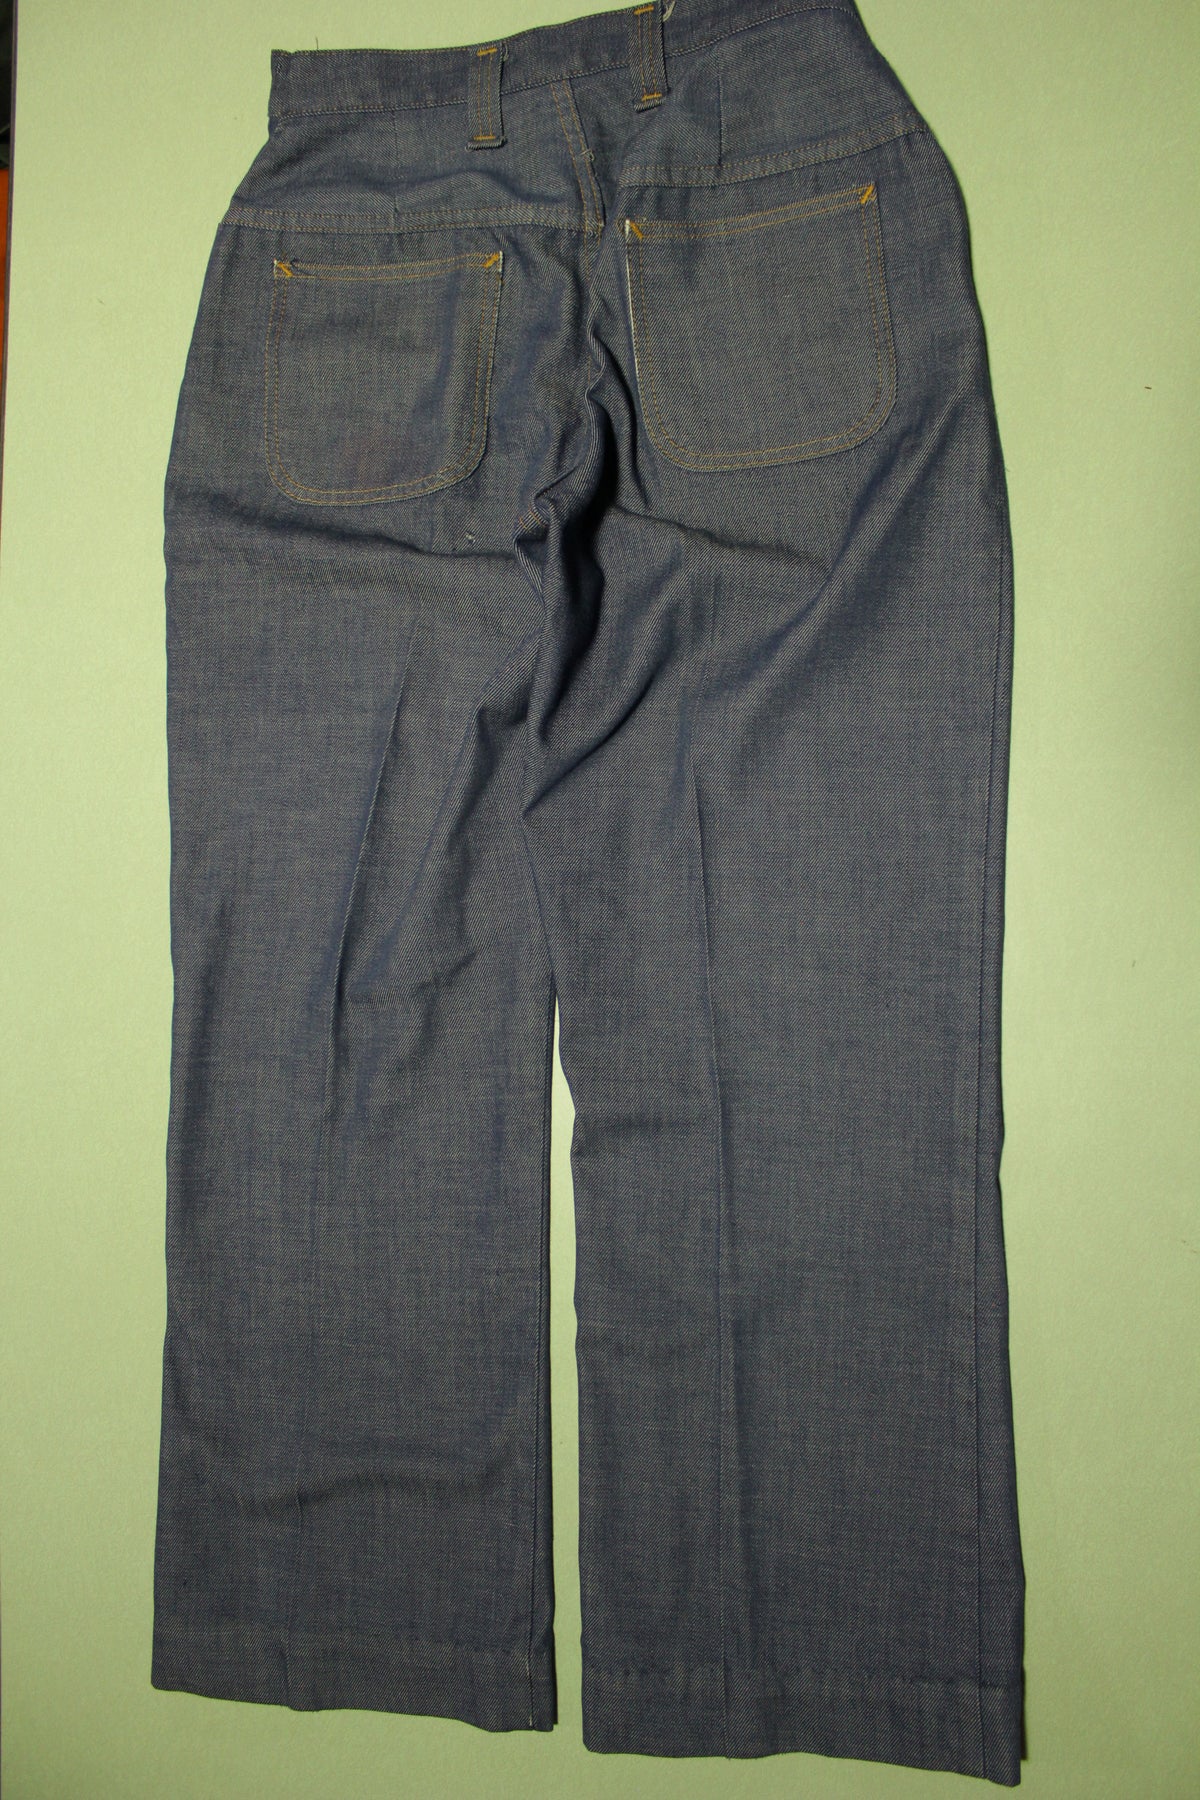 JC Penneys Vintage 70's Dark Wash Relaxed Fit Altered Waist Jeans